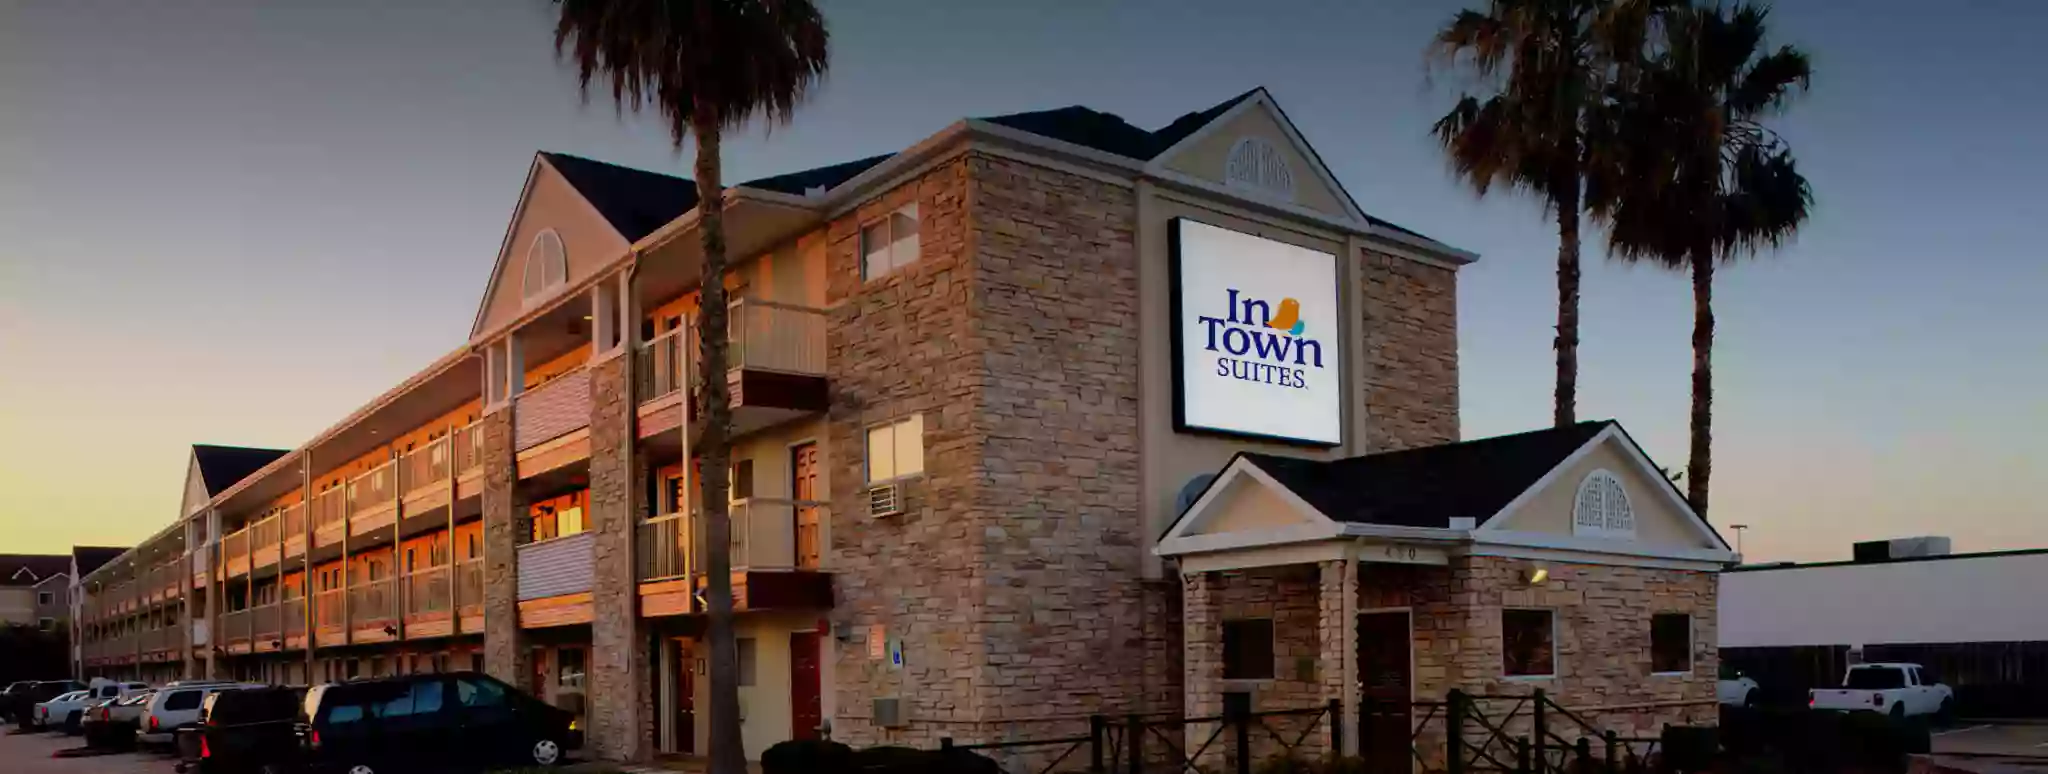 InTown Suites Extended Stay Albuquerque NM